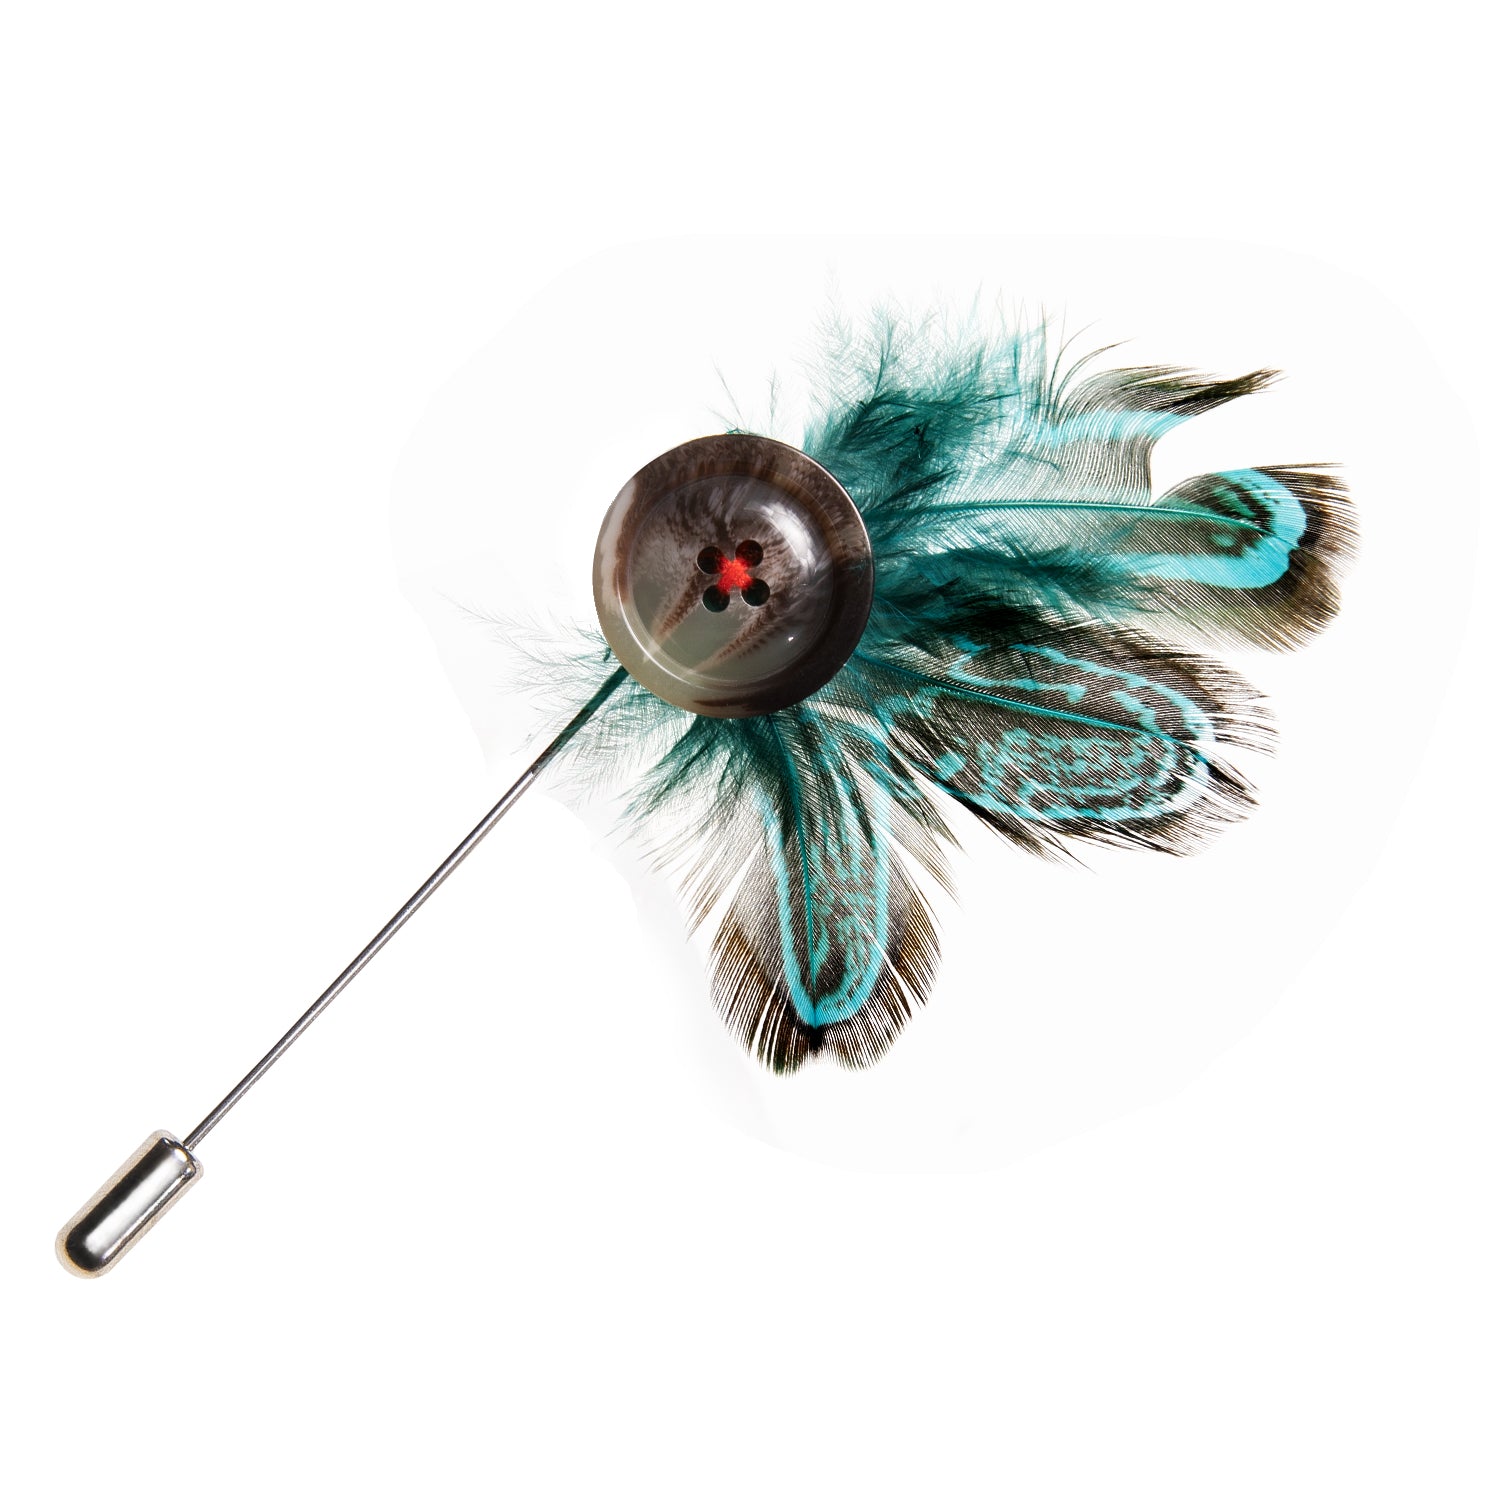 Barry.wang Men's Tie Accessories New Novelty Green Feather Lapel Pin